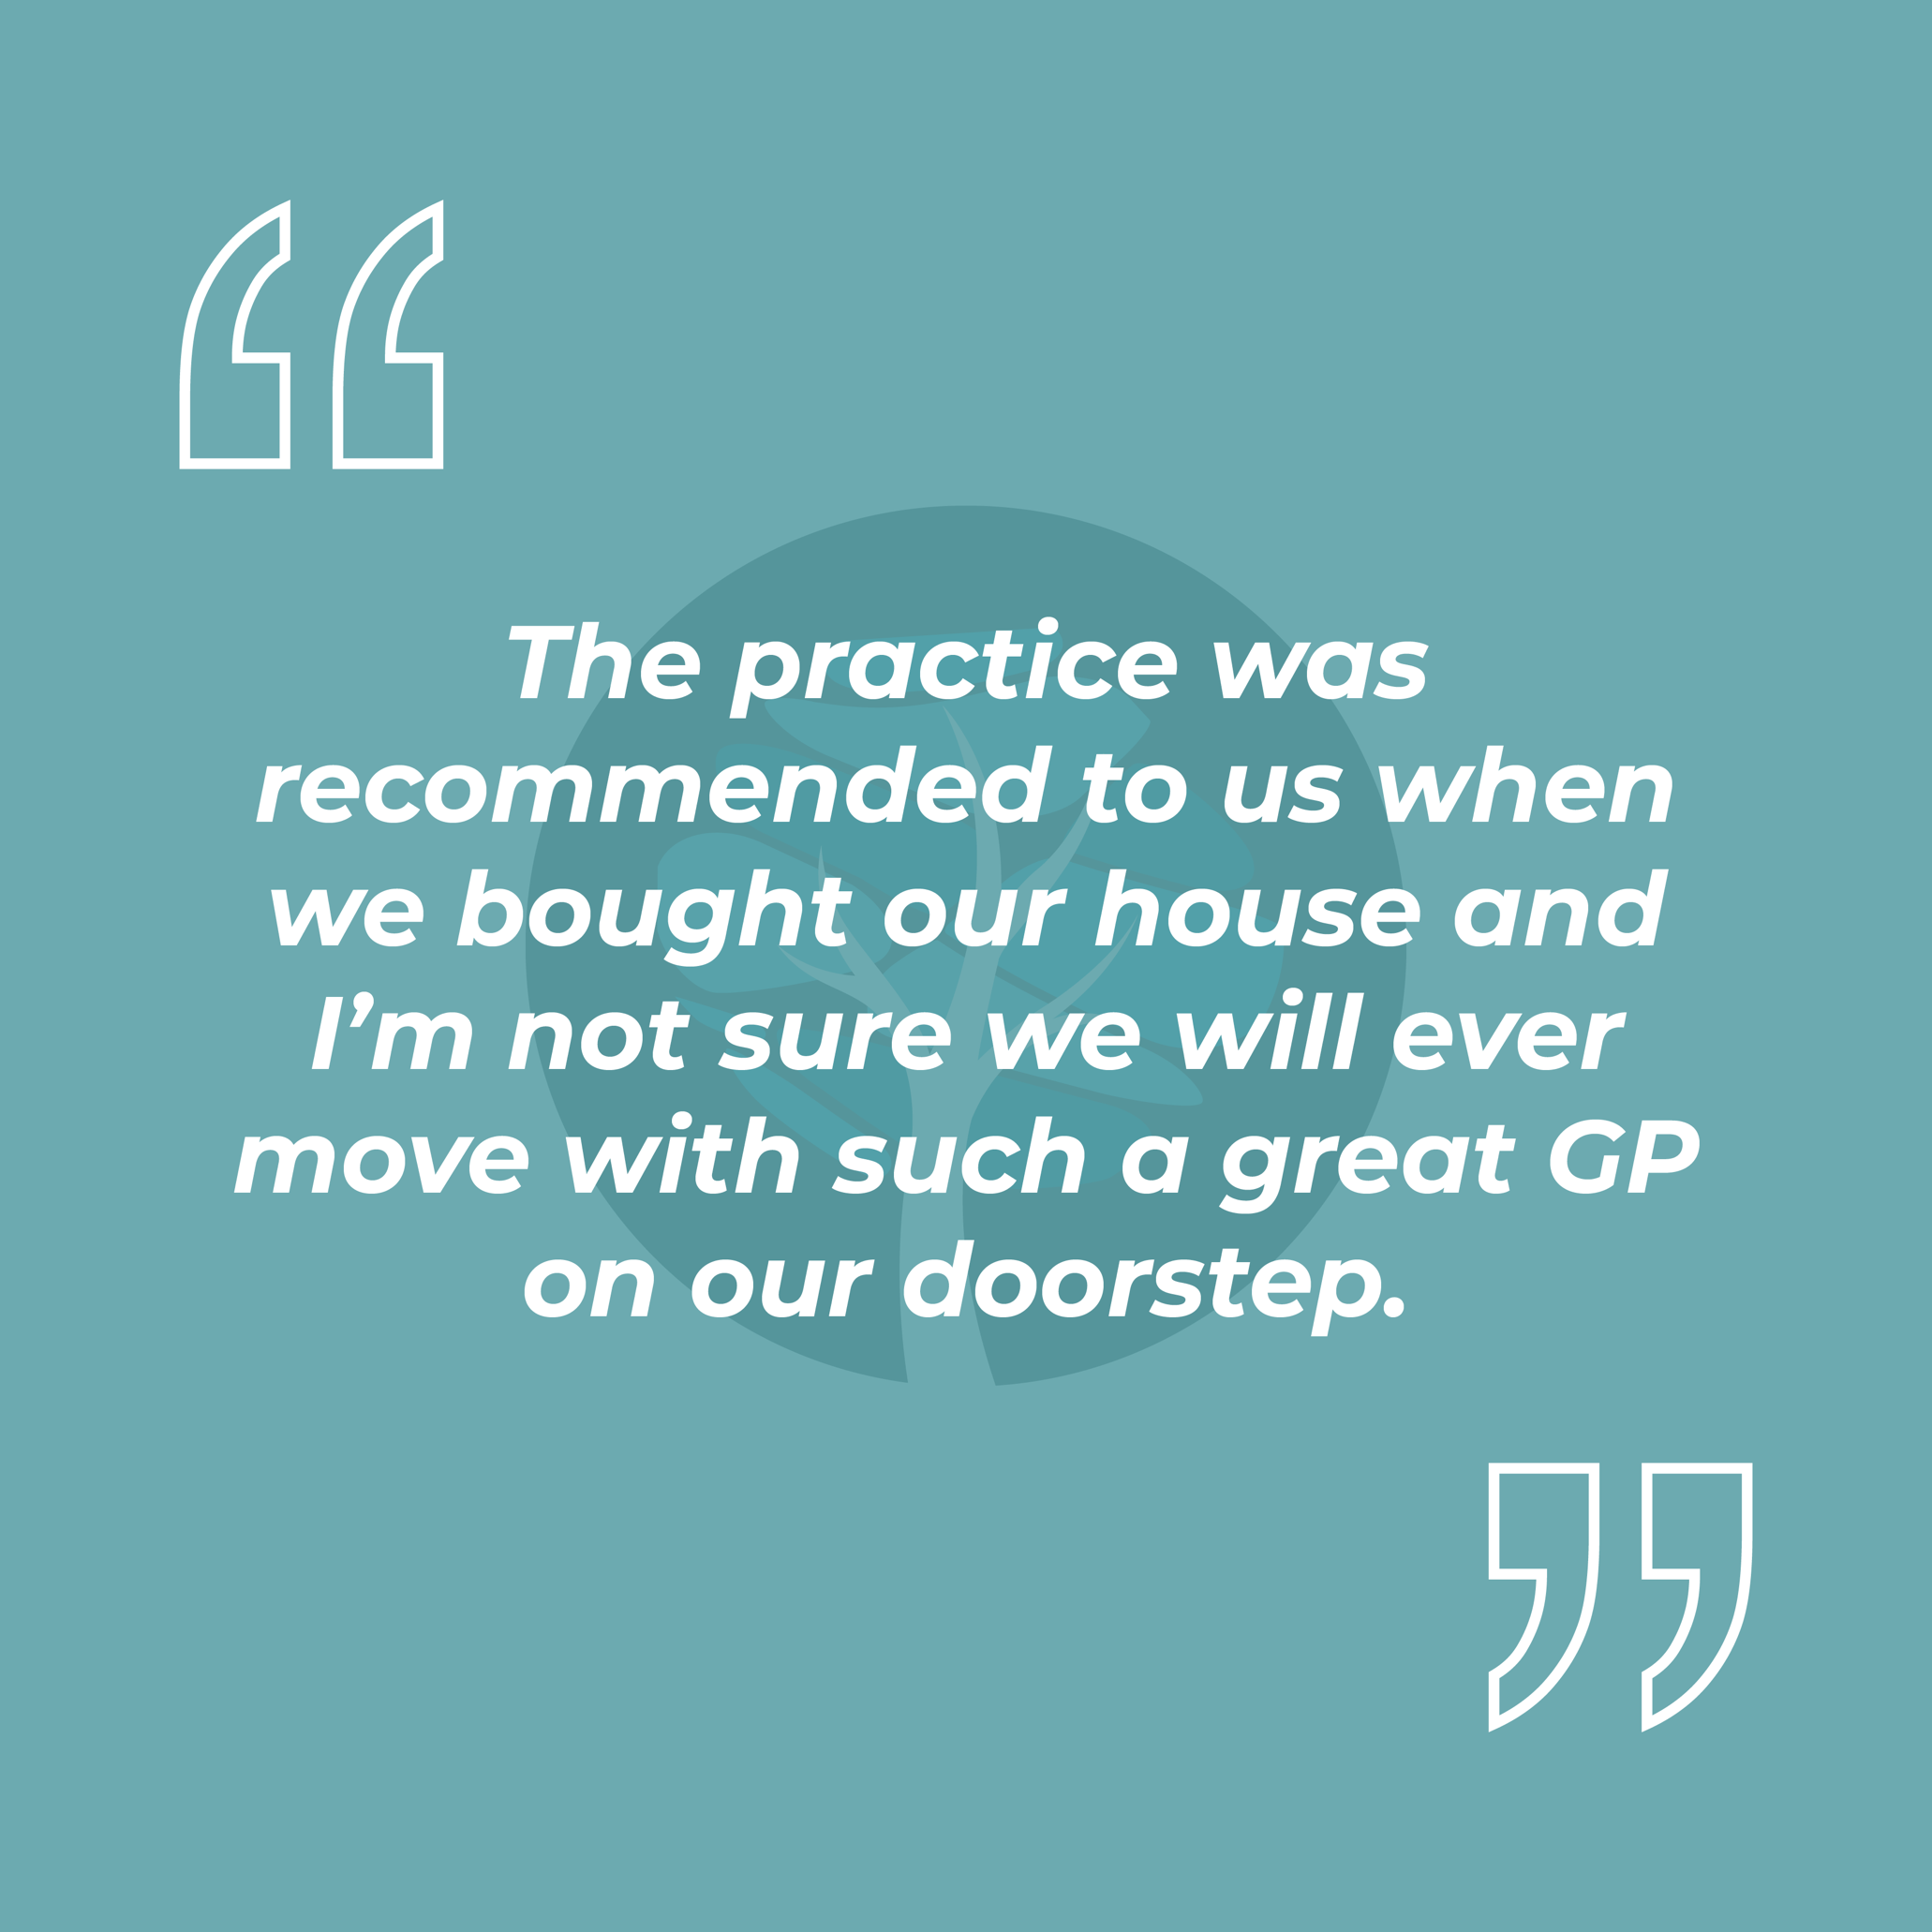 The practice was recommended to us when we bought our house and I’m not sure we will ever move with such a great GP on our doorstep.